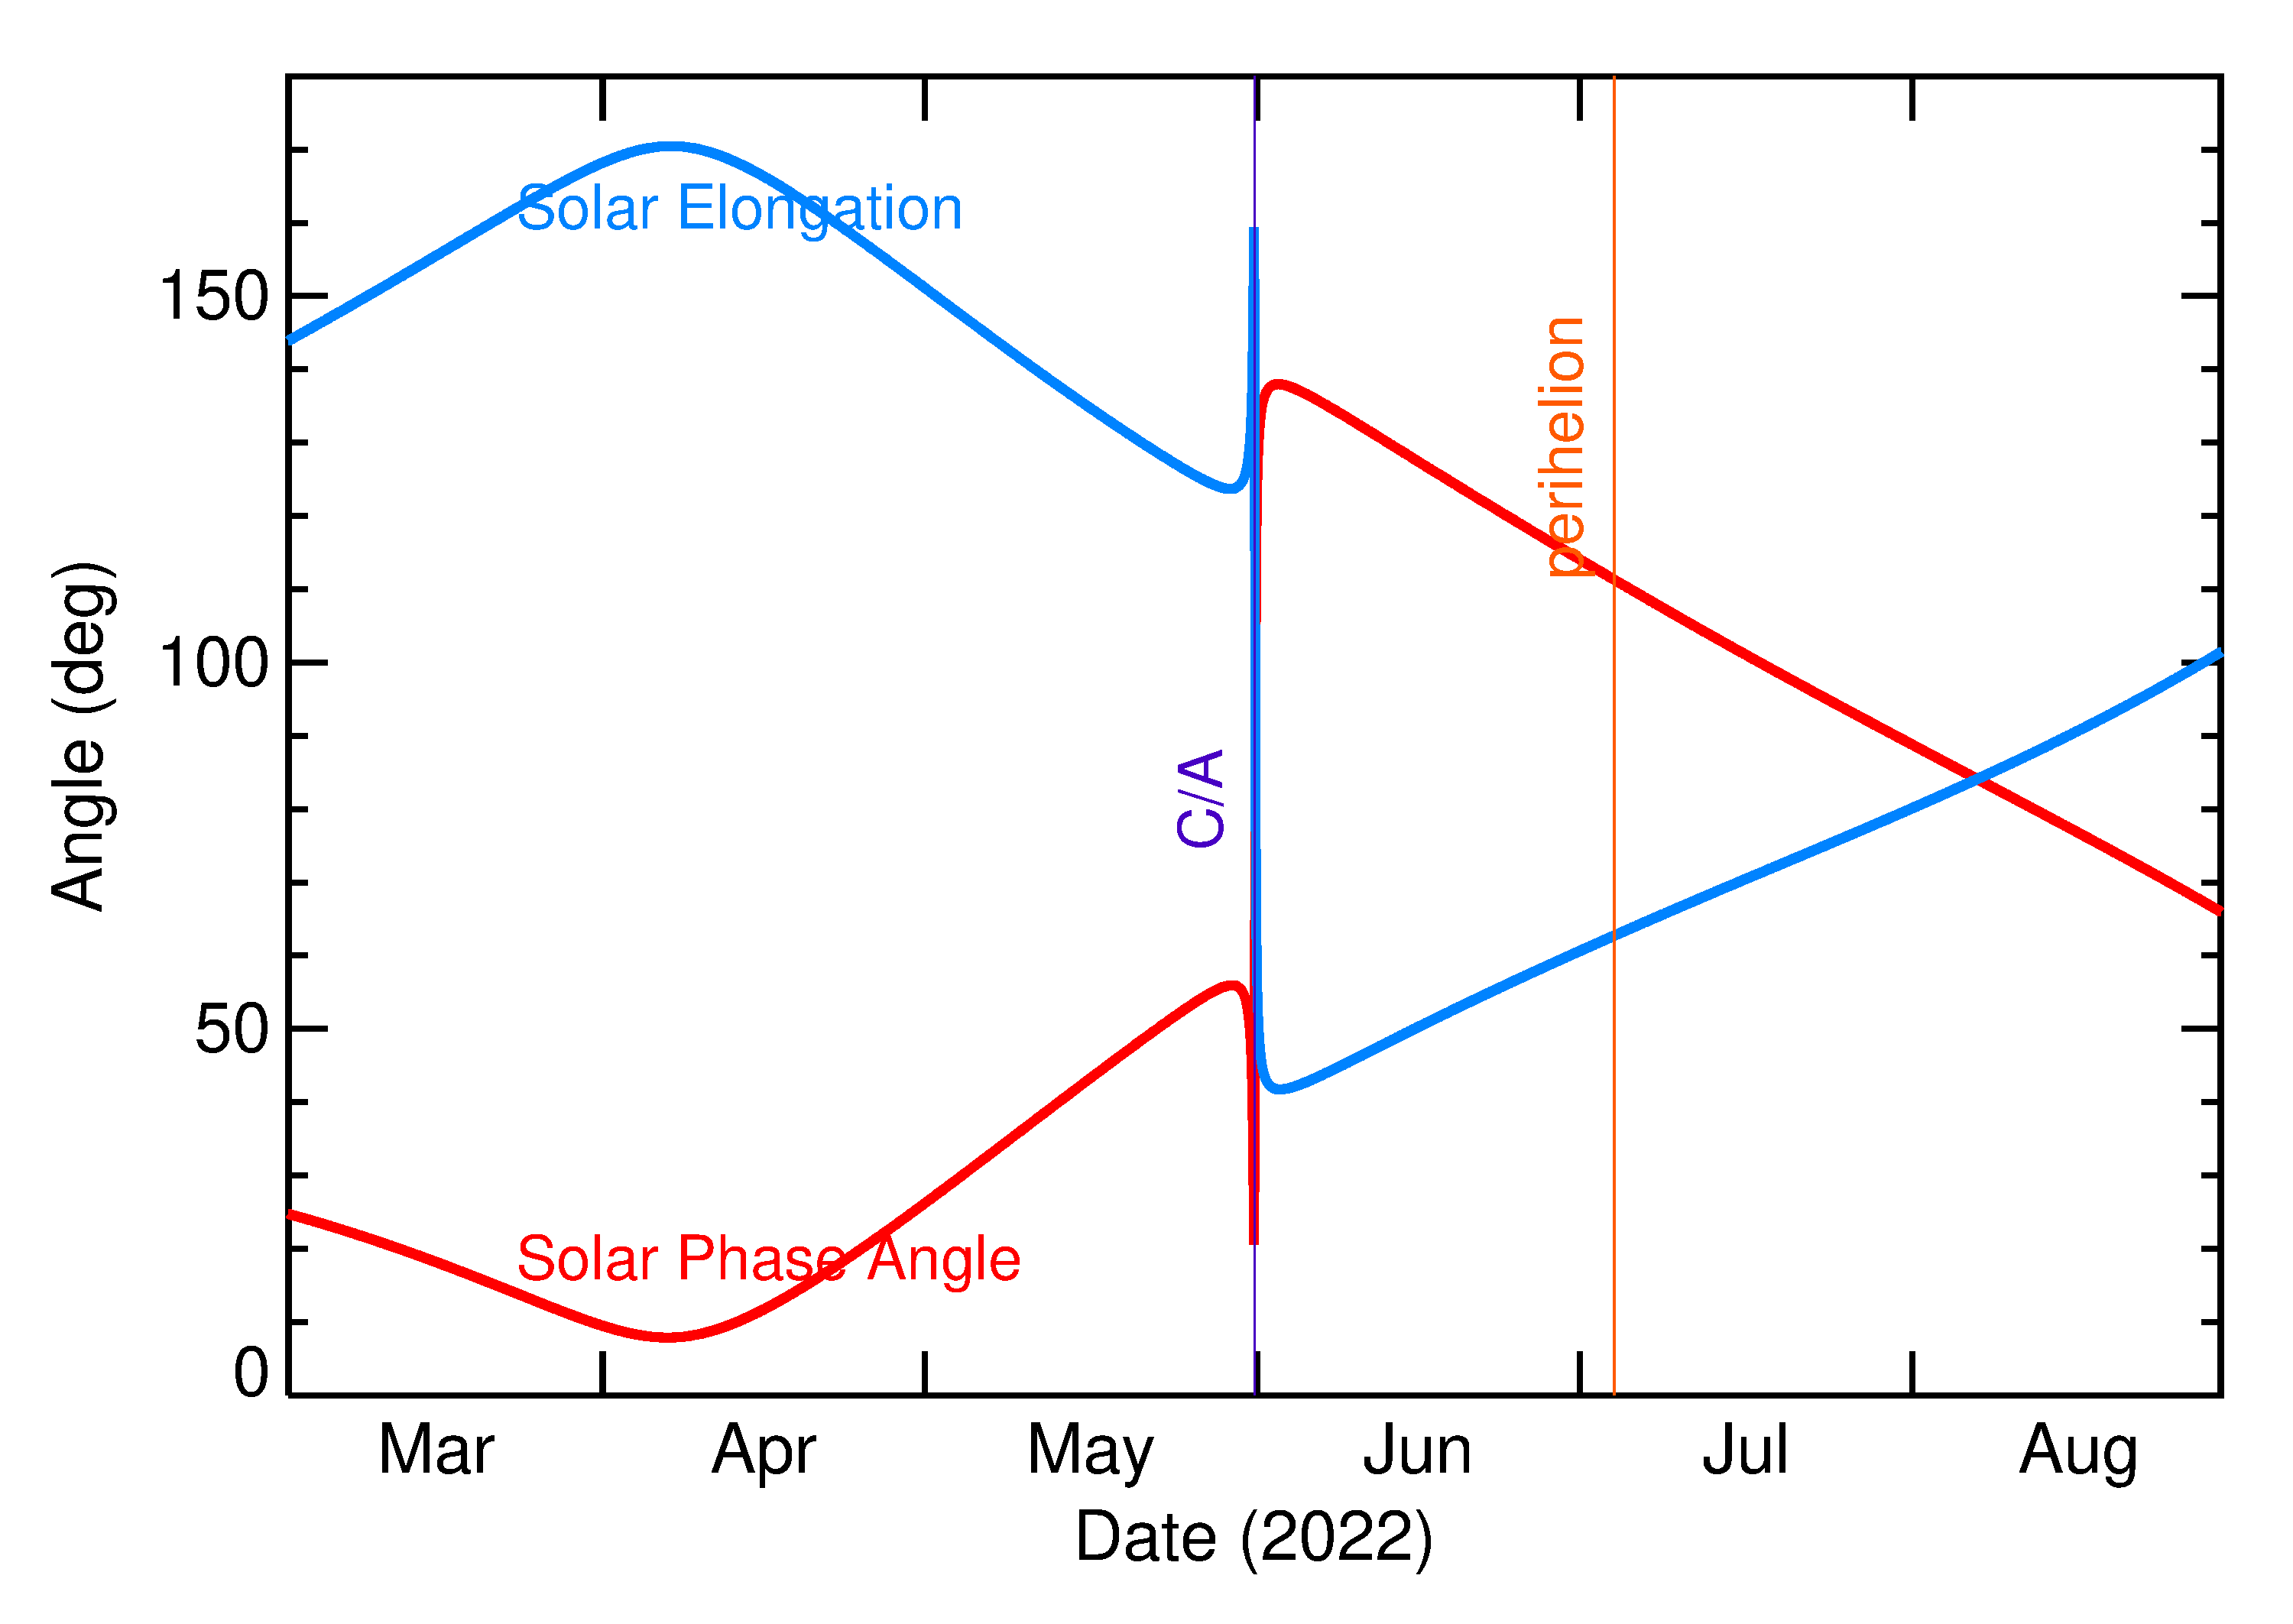 Solar Elongation and Solar Phase Angle of 2022 KQ5 in the months around closest approach